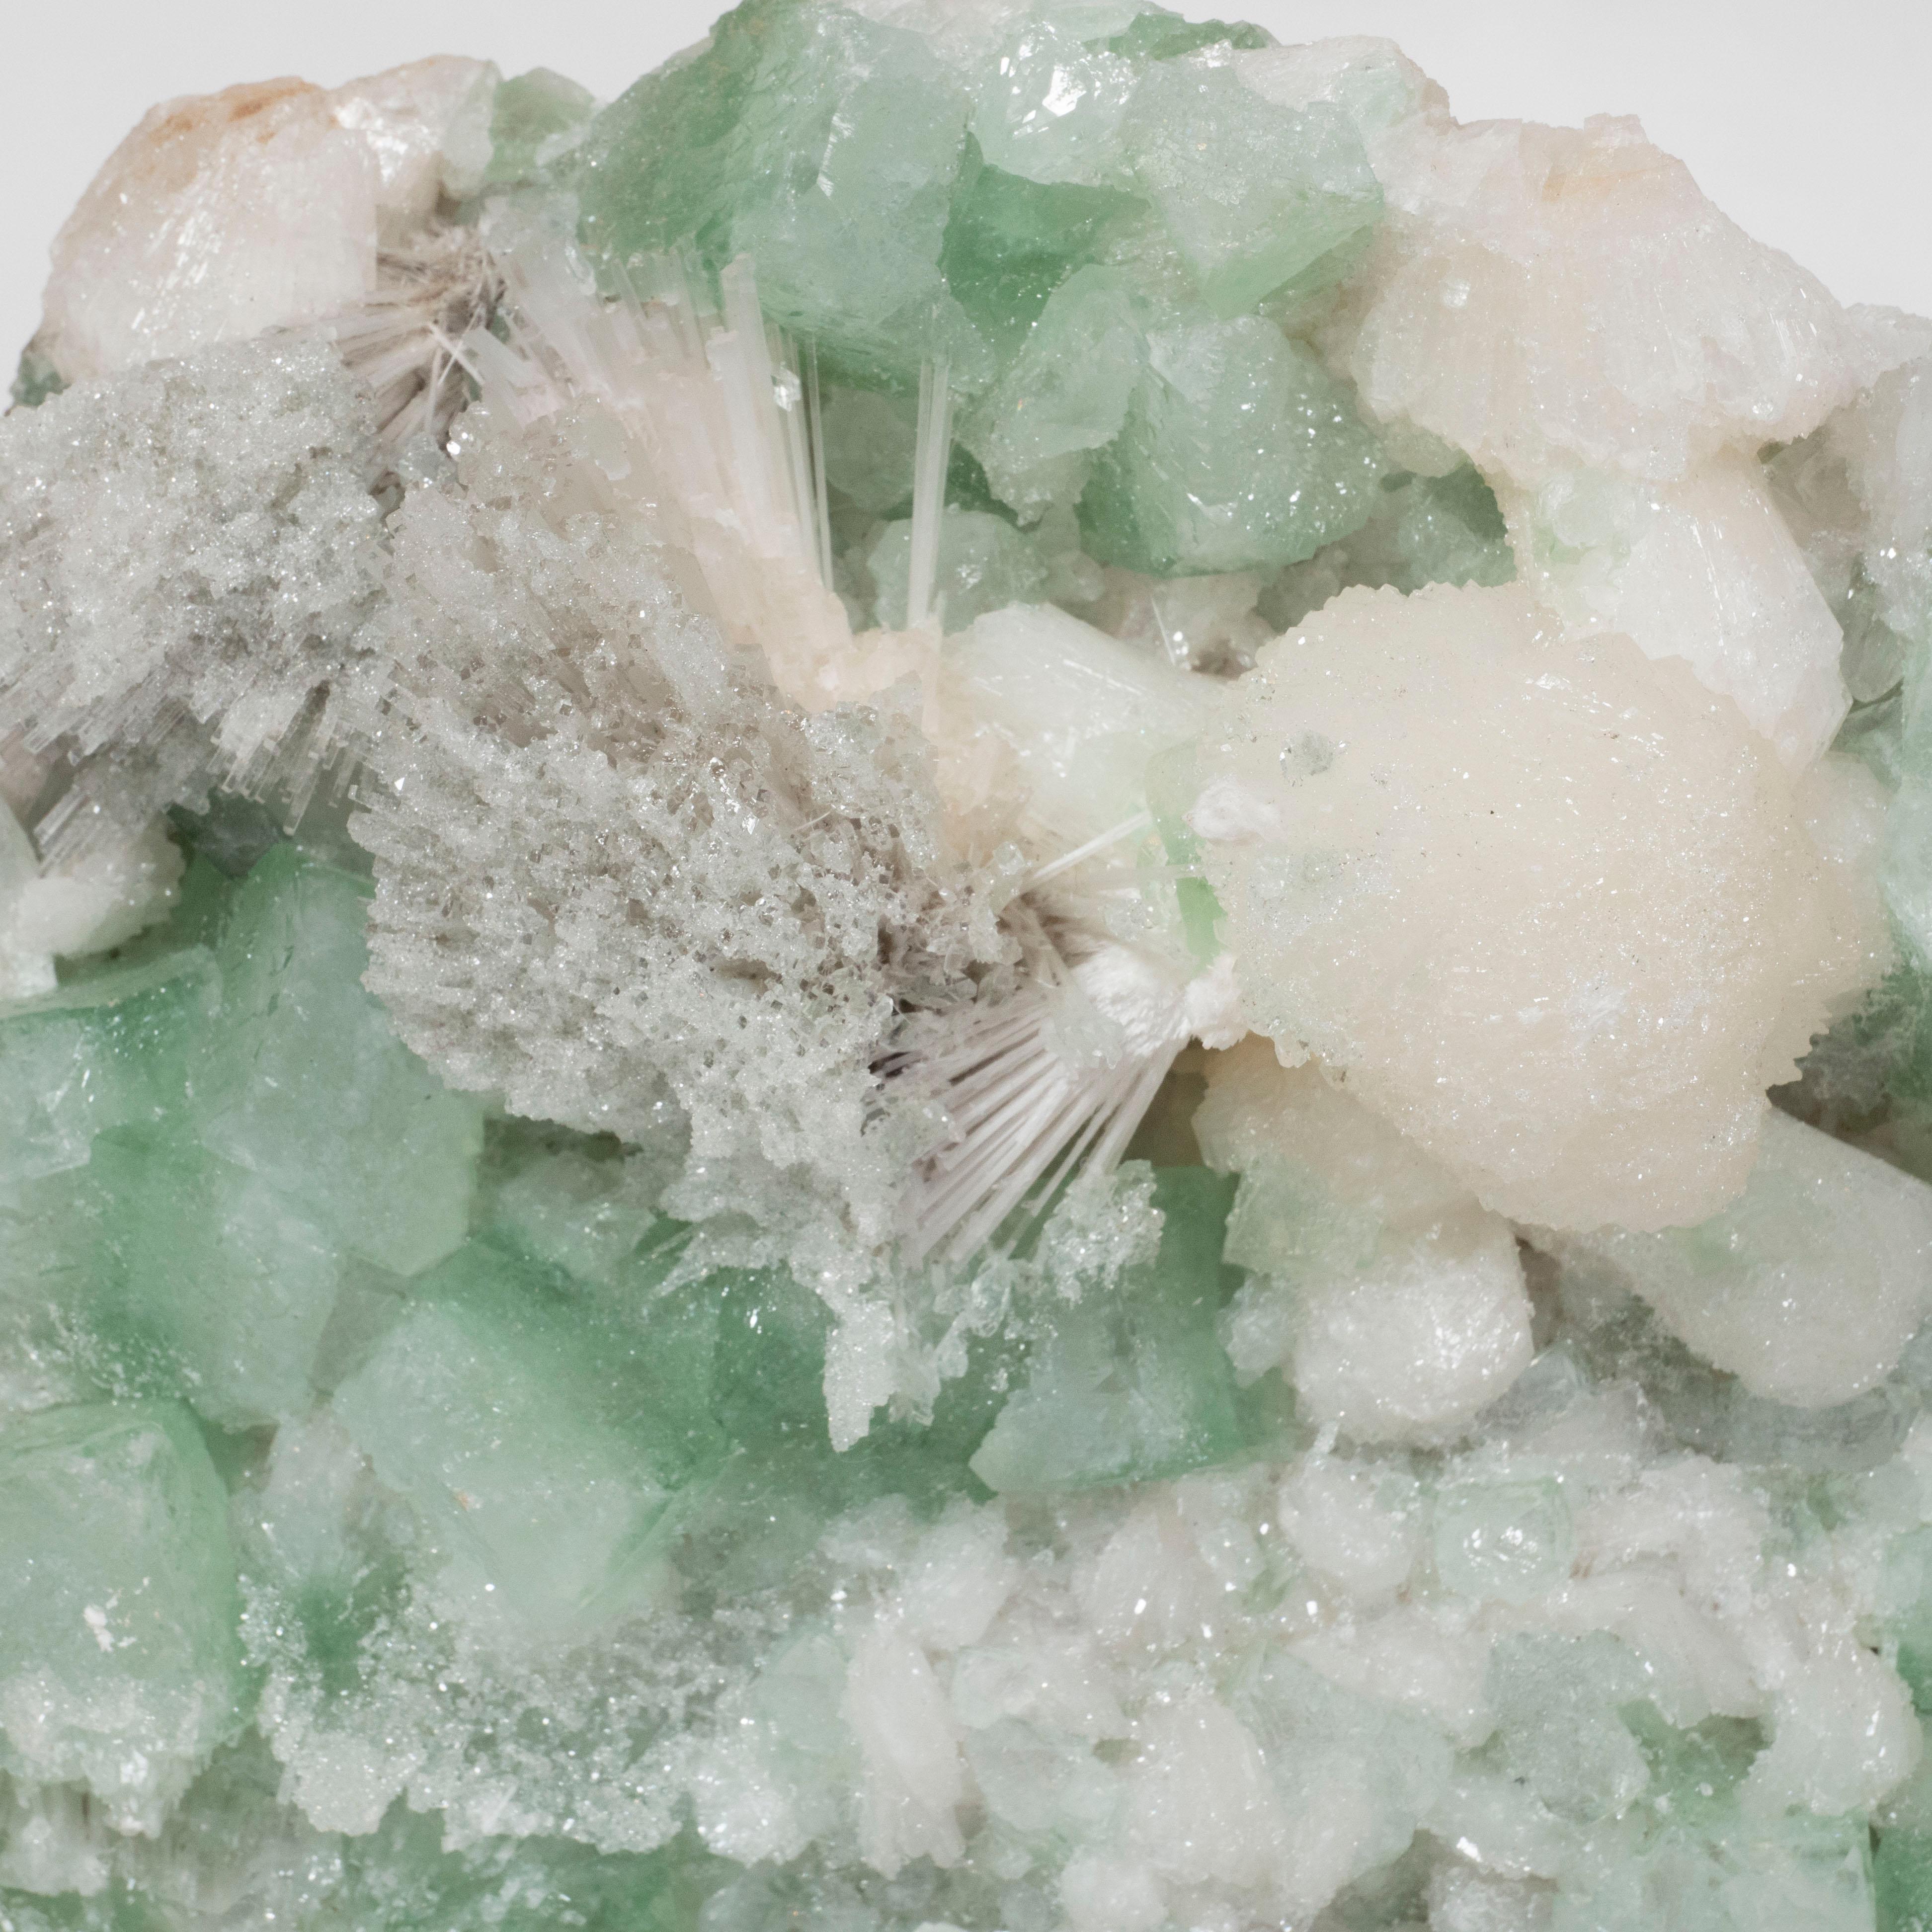 This rare and stunning modernist green rock specimen was mined in Brazil, during the 20th century. Composed of green apophylite and scolocite, this rock crystal offers a range of subtle natural hues from chalky emerald greens to dove grays all in a